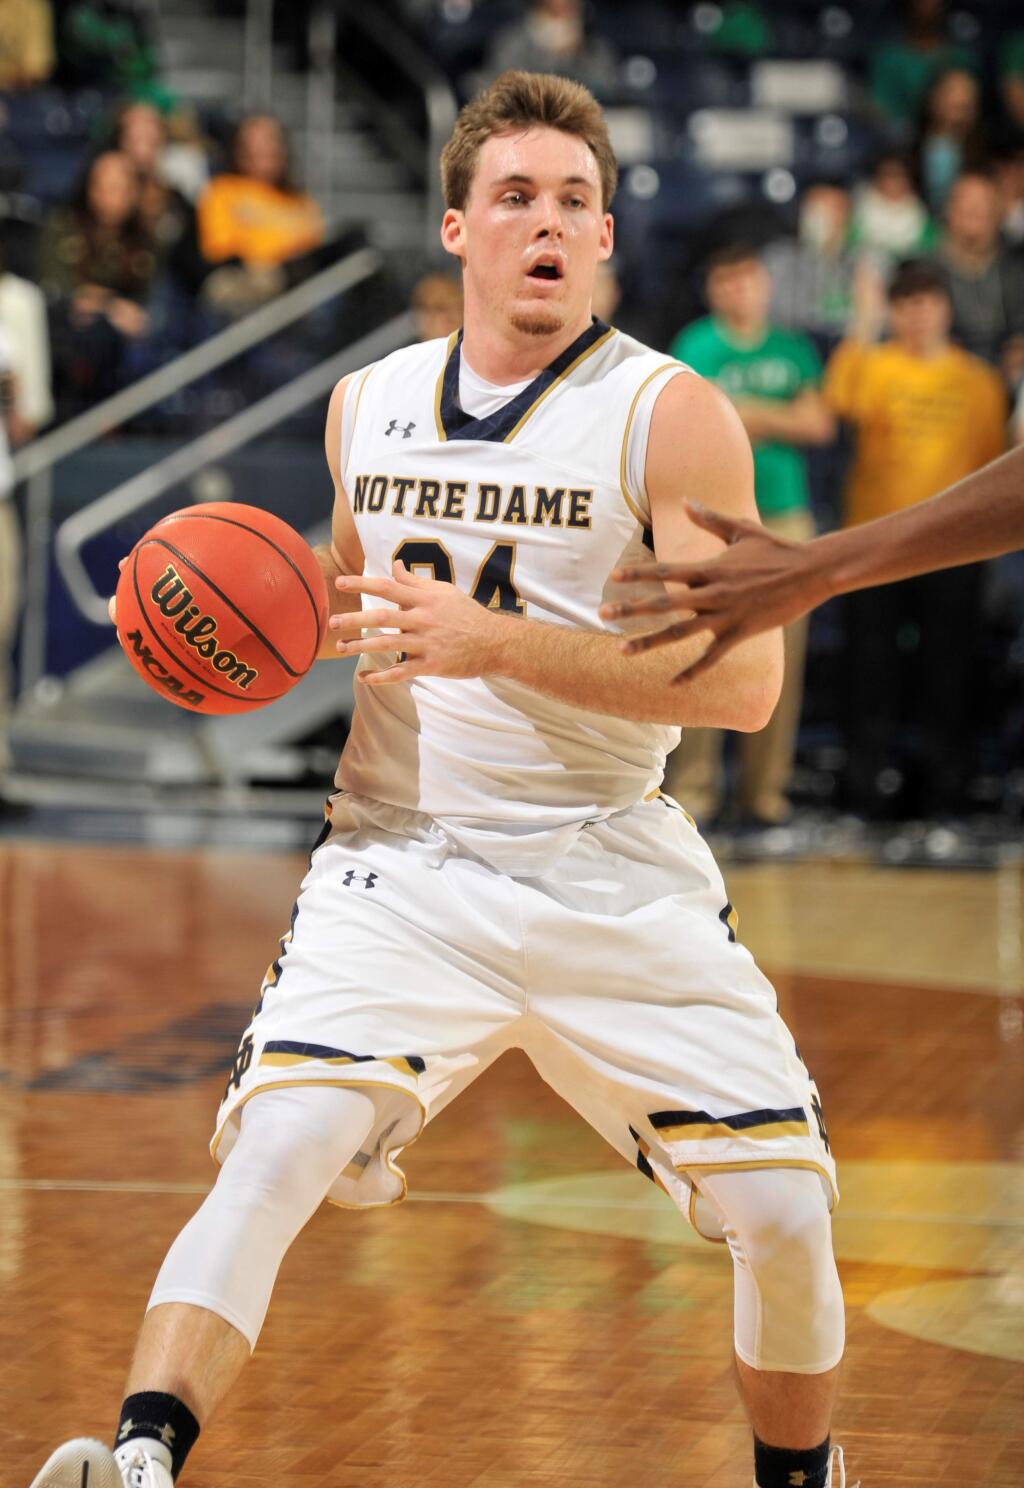 Notre Dame guard Pat Connaughton heads up court in an NCAA basketball game Wednesday Nov. 19, 2014 in South Bend, Ind. (AP Photo/Joe Raymond)